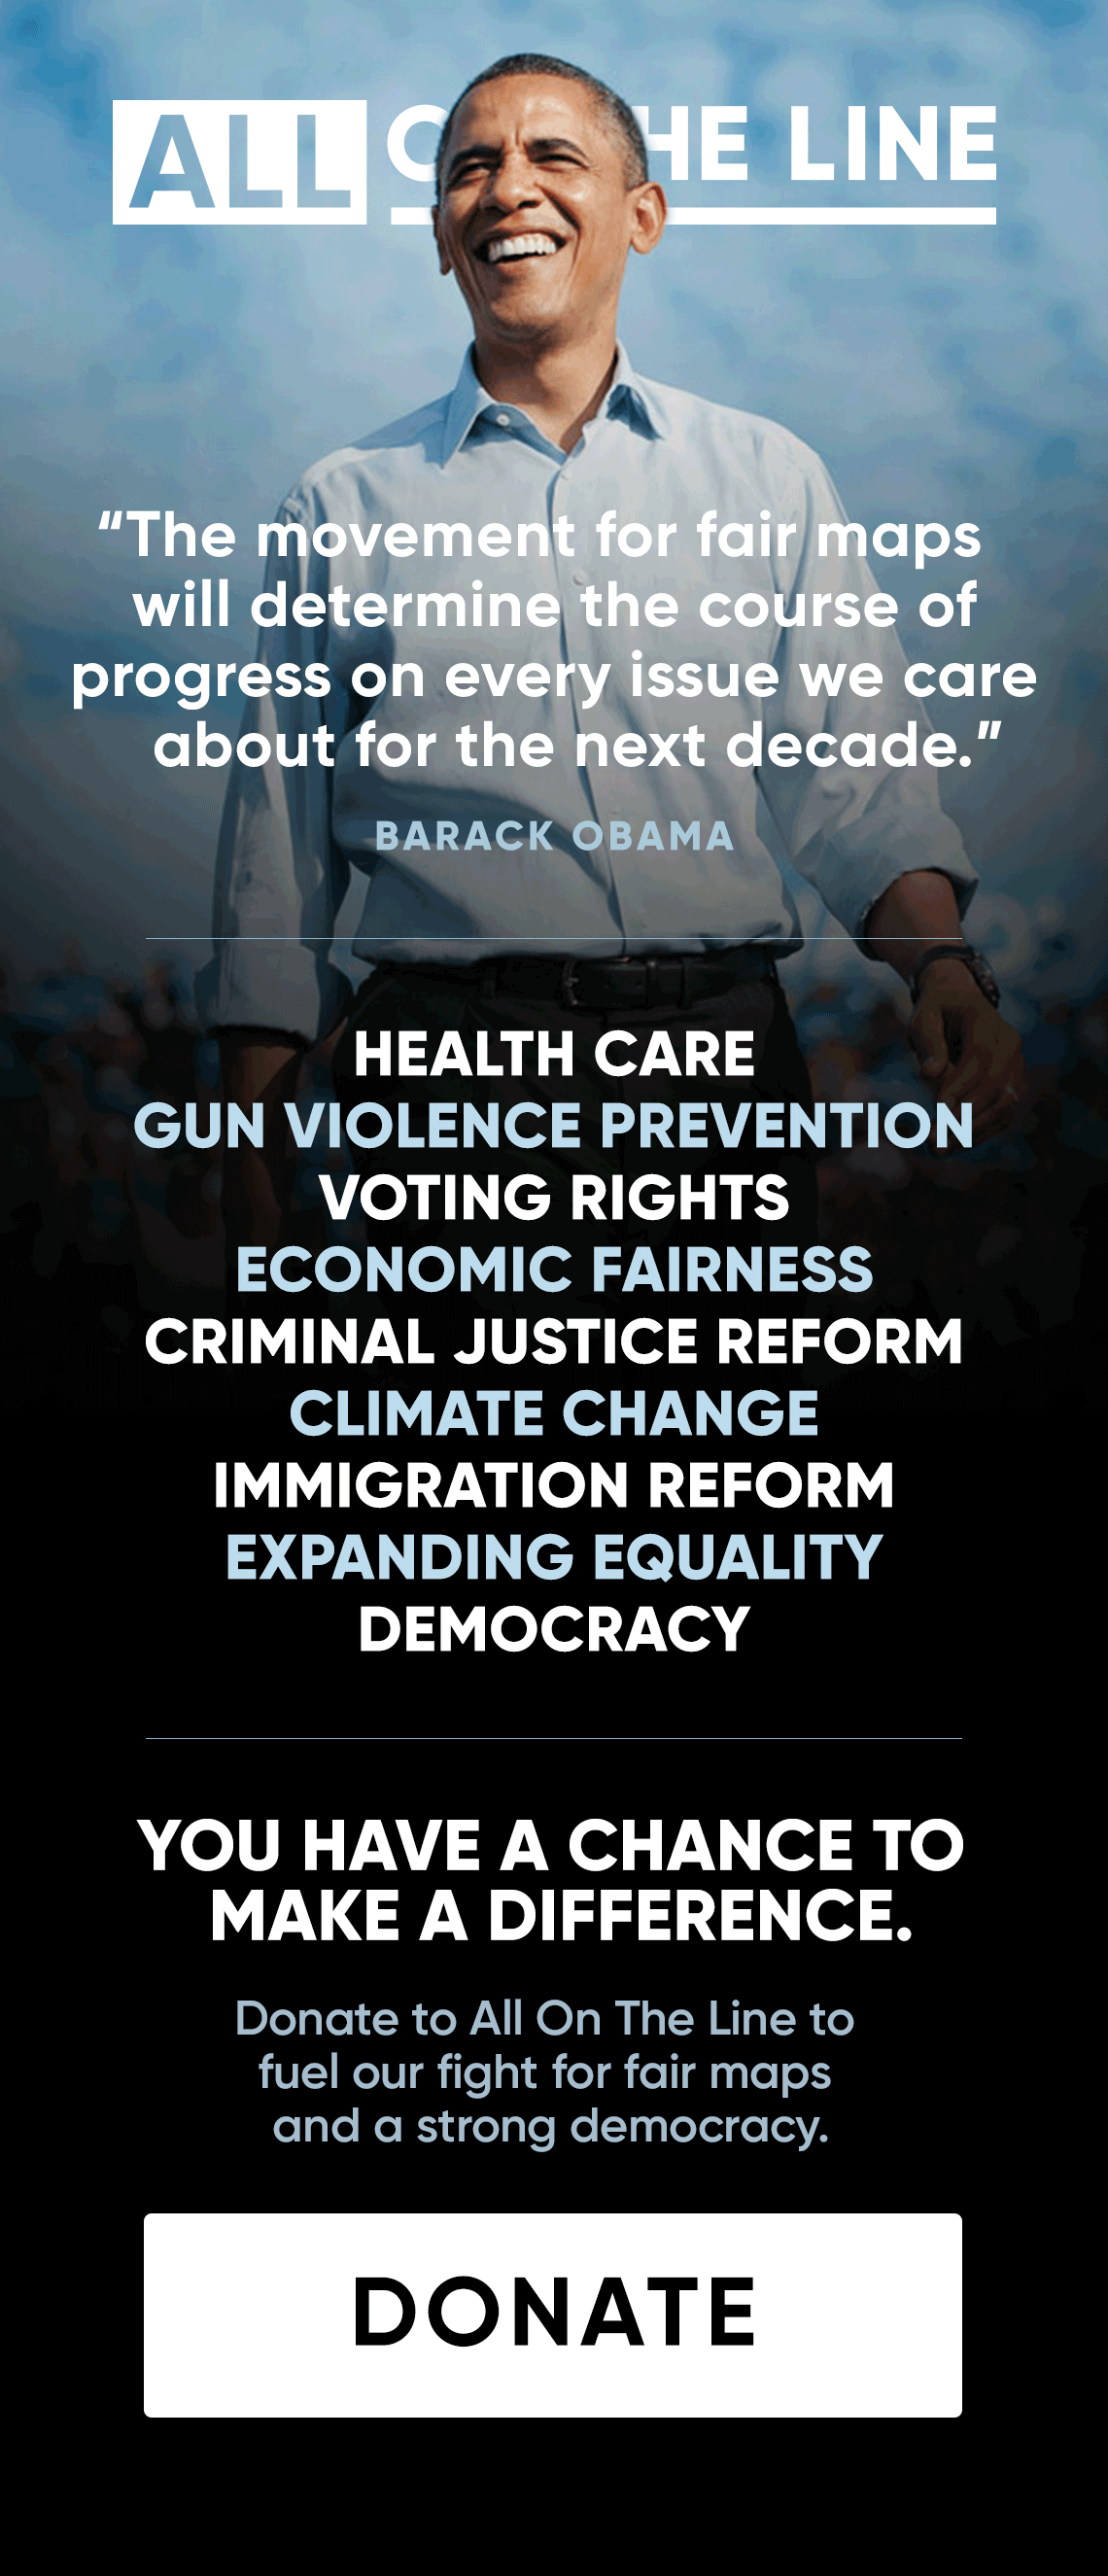 'The movement for fair maps will determine the course of progress on every issue we care about for the next decade.' - Barack Obama. Health Care - Gun Violence Prevention - Voting Rights - Economic Fairness - Criminal Justice Reform - Climate Change - Immigration Reform - Expanding Equality - Democracy. You have a chance to make a difference. Donate to All On The Line to fuel our fight for fair maps and a strong democracy. DONATE